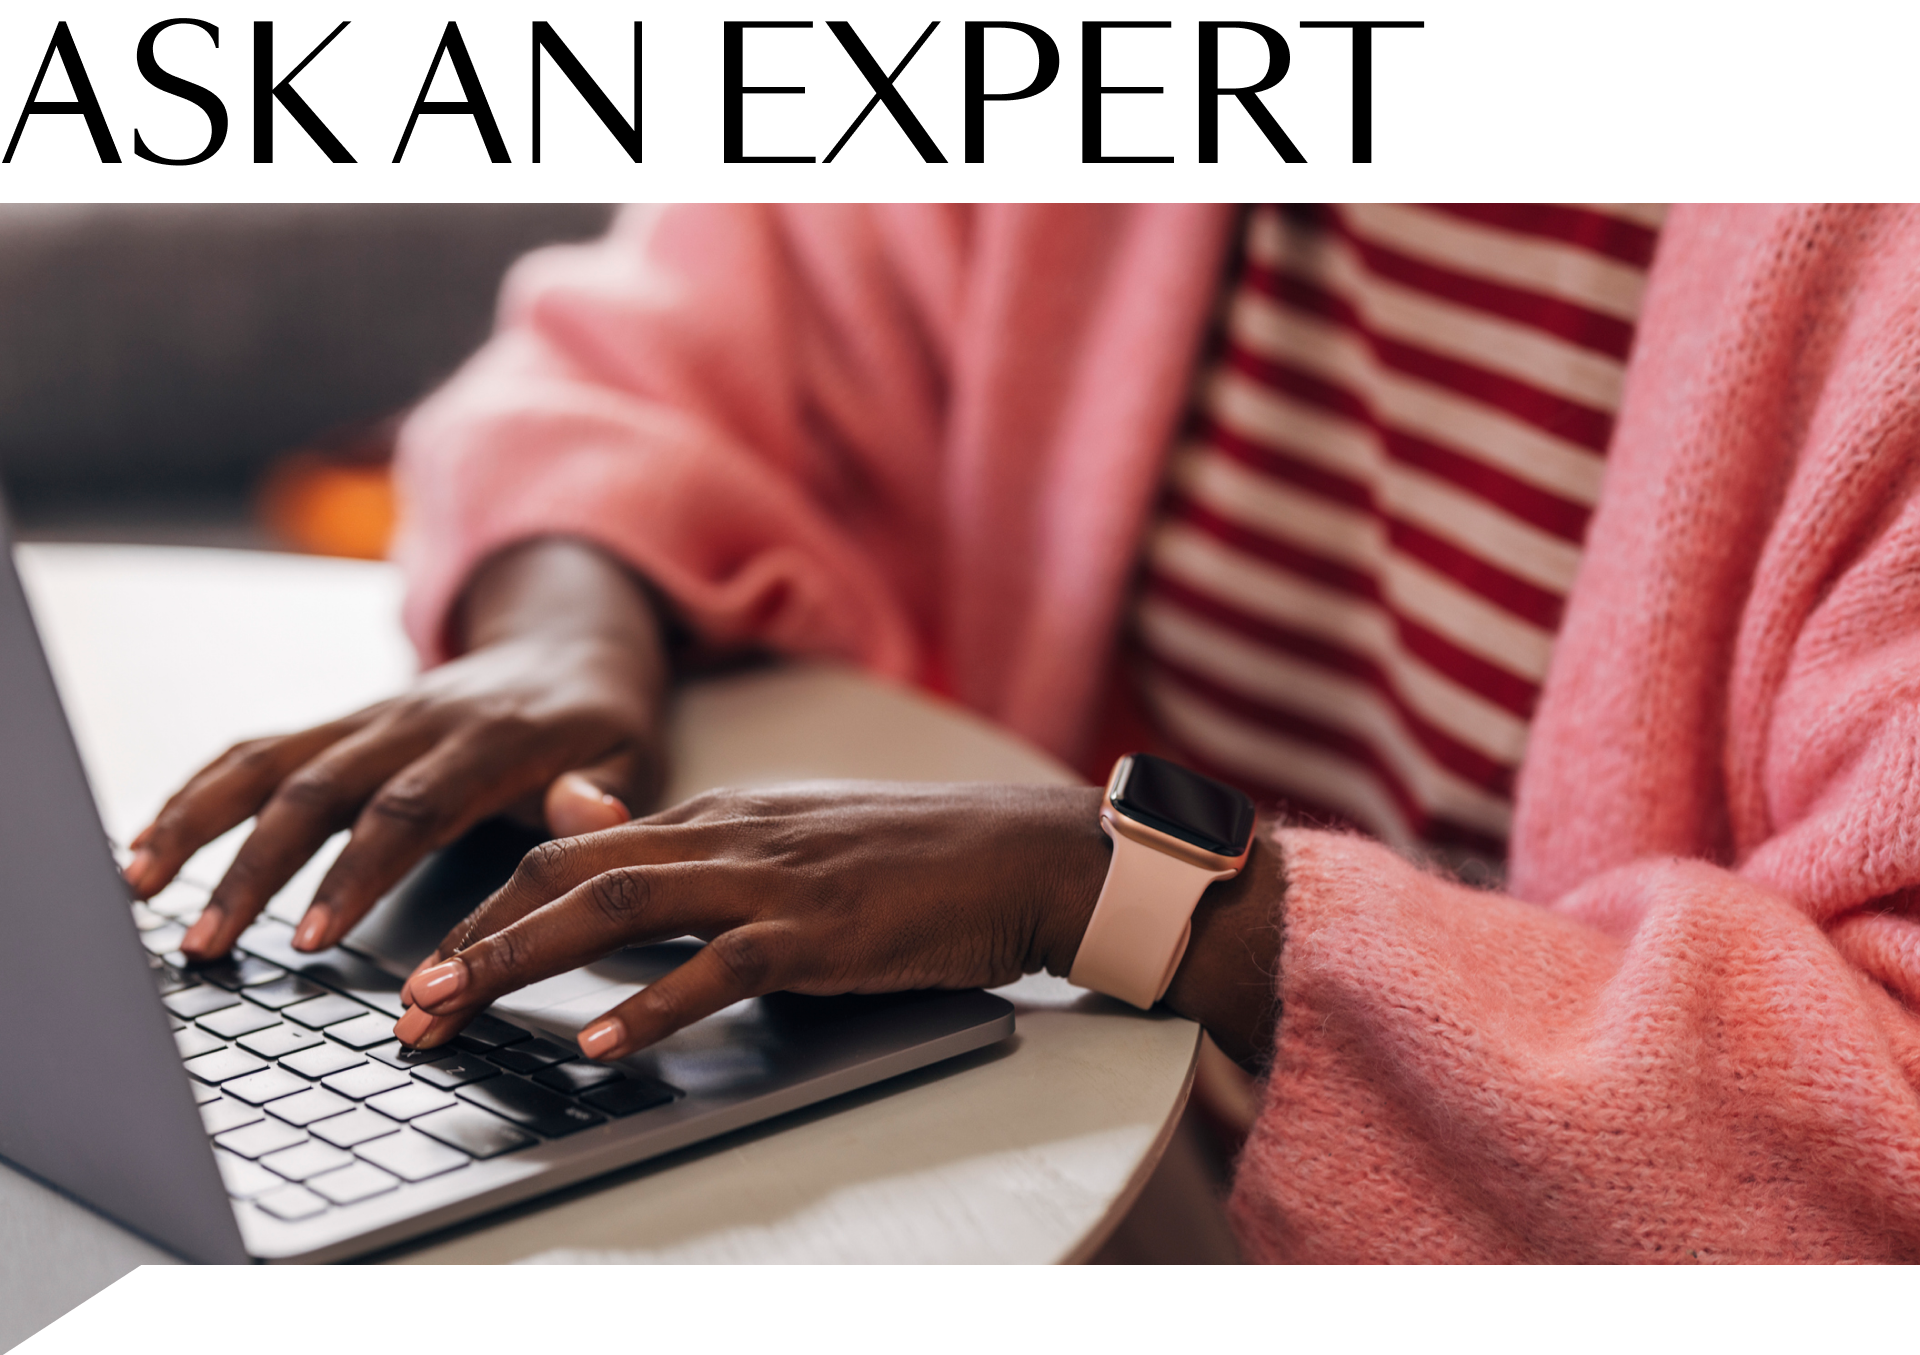 ask an expert text and stock image of hands typing on a laptop